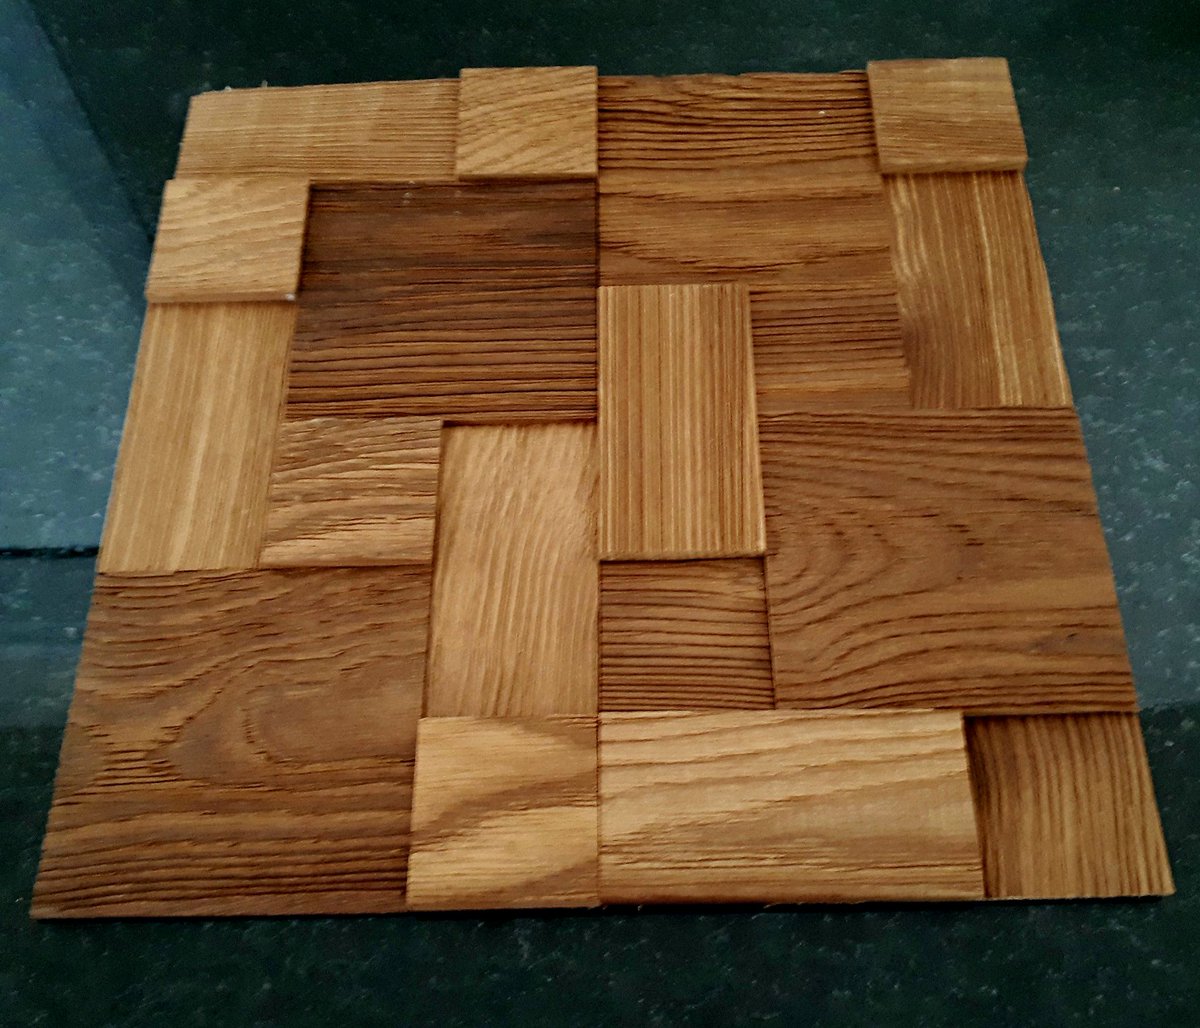 Bold blocks of wood strategically placed to create a perfect balance. Wood never looked so good. Make a real statement on your next wall or ceiling project.
#wallcoverings #ceilingtiles #handcrafted #walltiles #woodpanels #toronto #muskoka #newyork #losangeles #designers